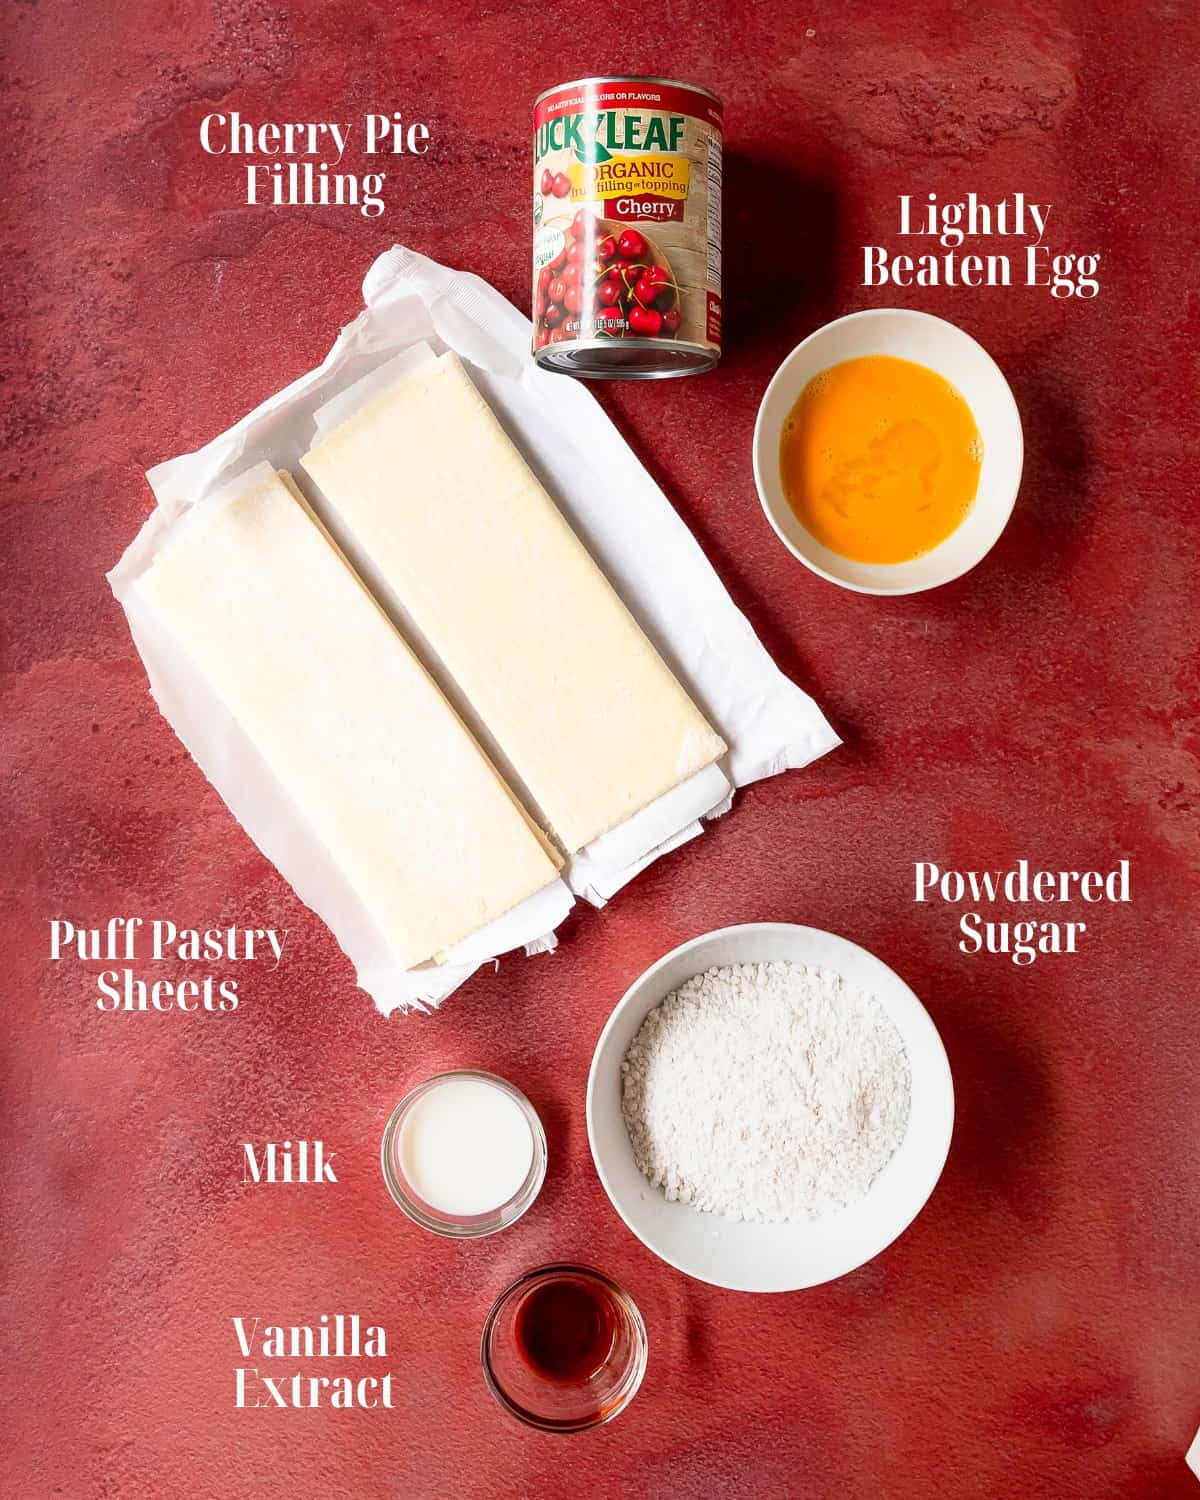 Gather store bought or homemade puff pastry sheets, cherry pie filling, an egg and sugar for topping. For the vanilla glaze, gather powdered sugar, milk and vanilla extract. 